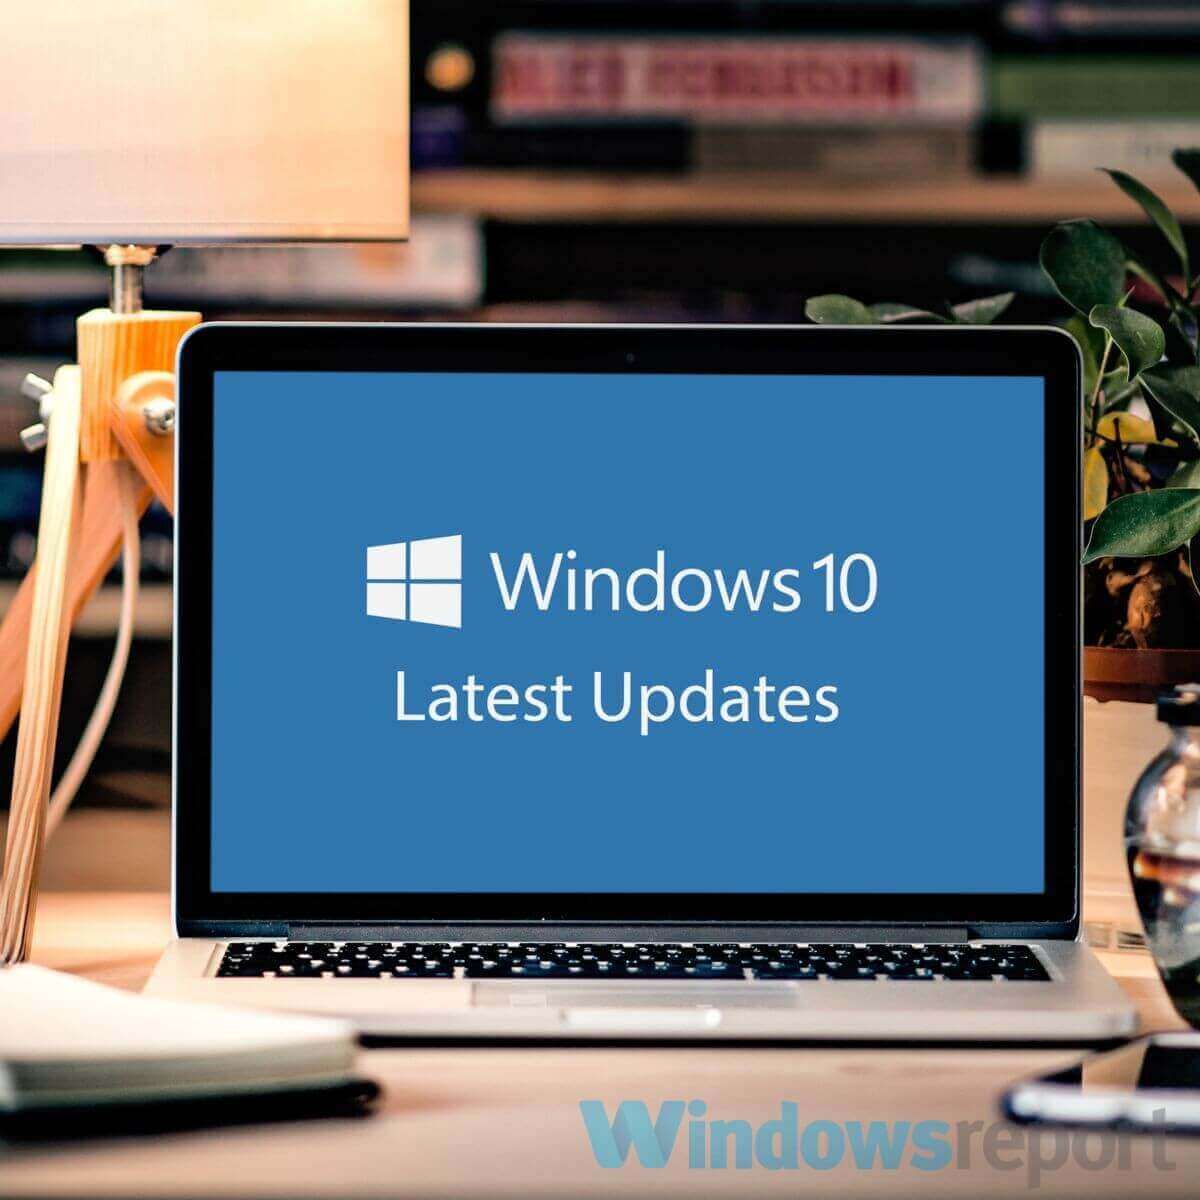 Download the Windows 10 August Patch Tuesday Updates today